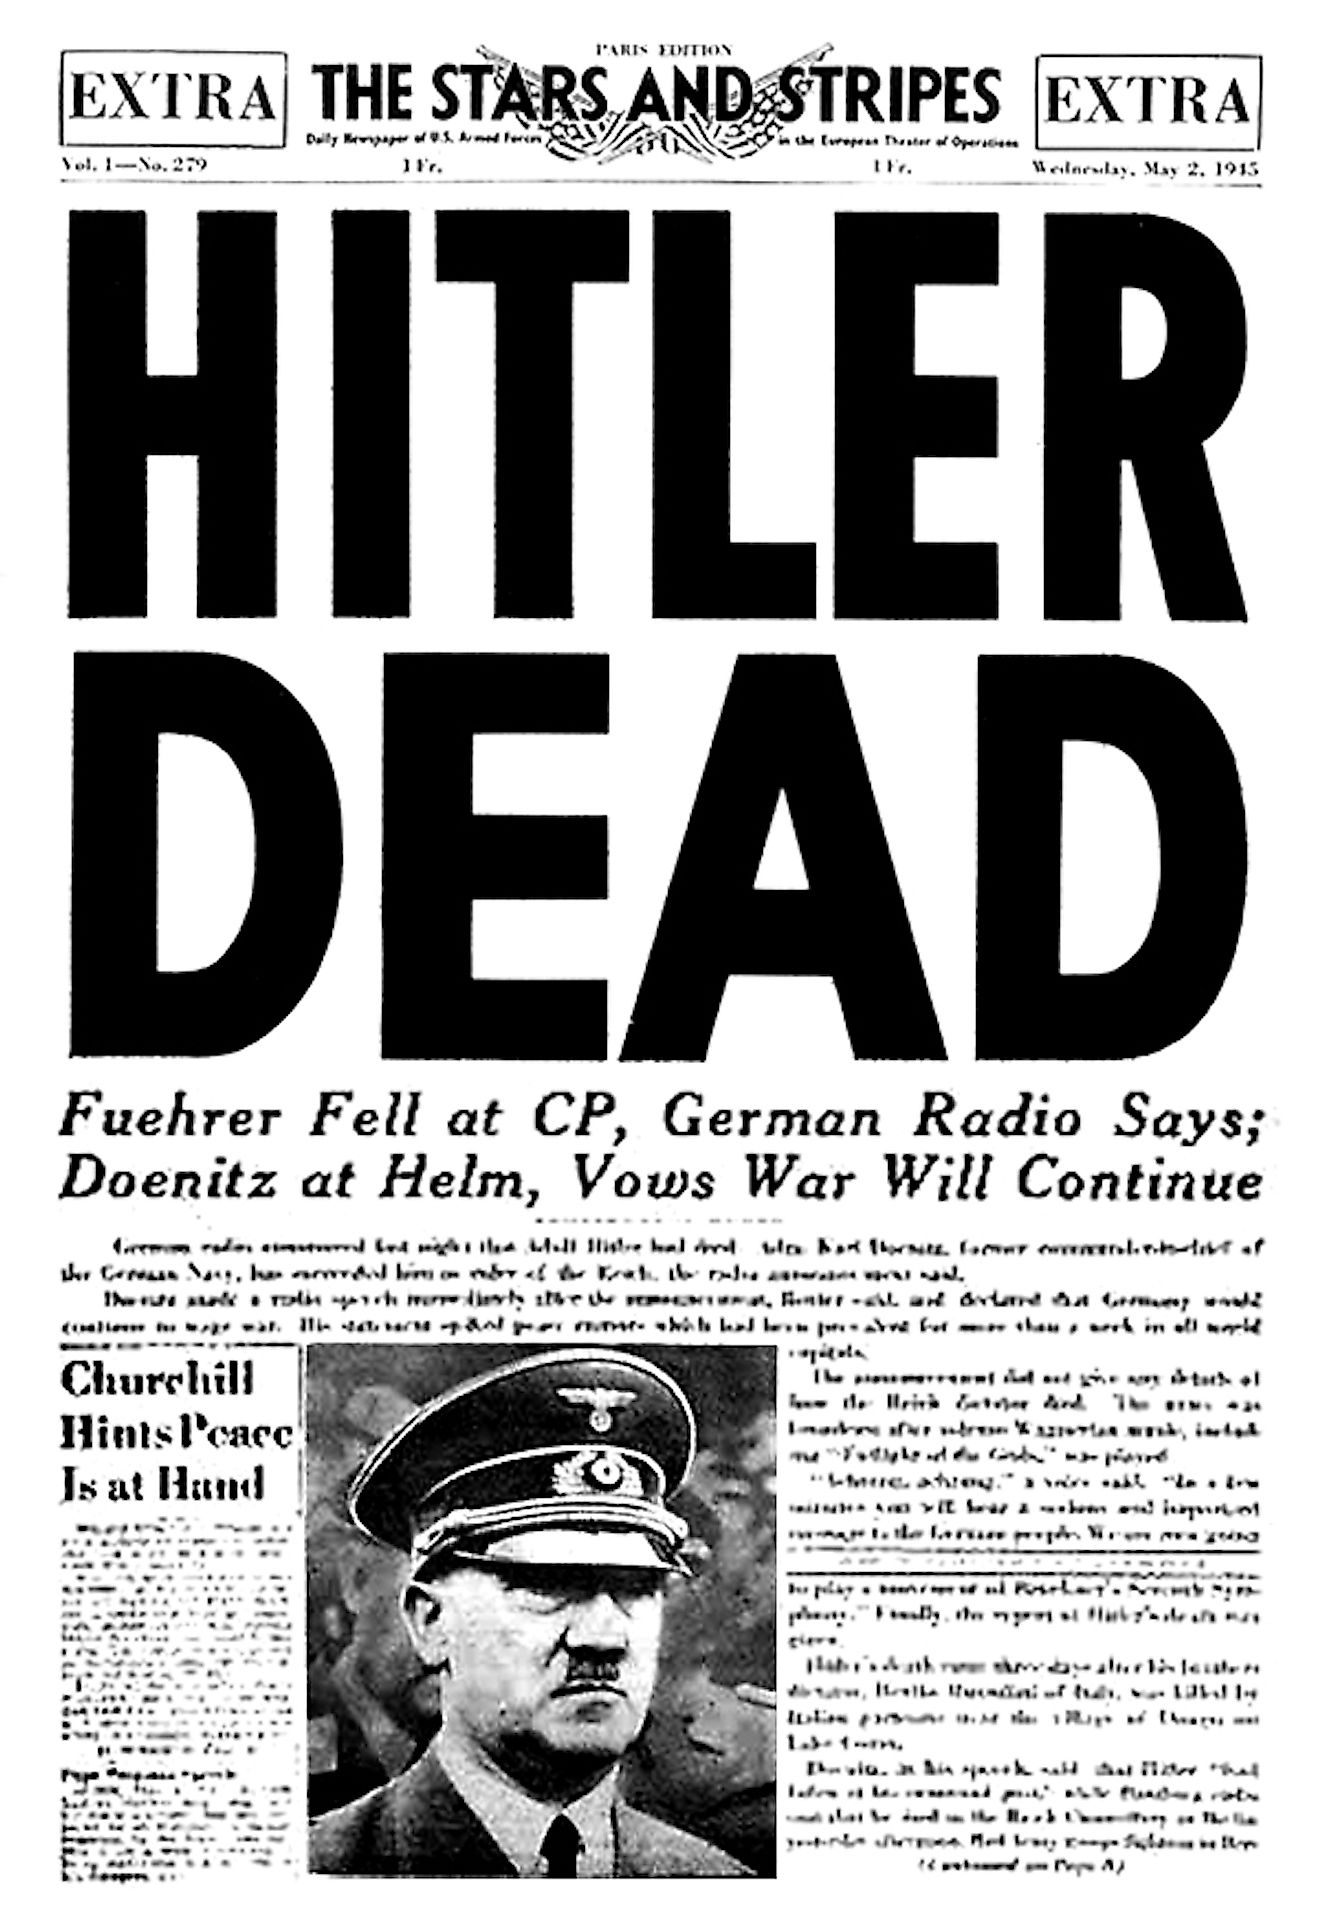 Although there were several attempts to assassinate him, Hitler eventually died by committing suicide. Image credit: A headline in the U.S. Army newspaper Stars and Stripes announcing Hitler's death/Bundesarchiv, Bild/Public domain